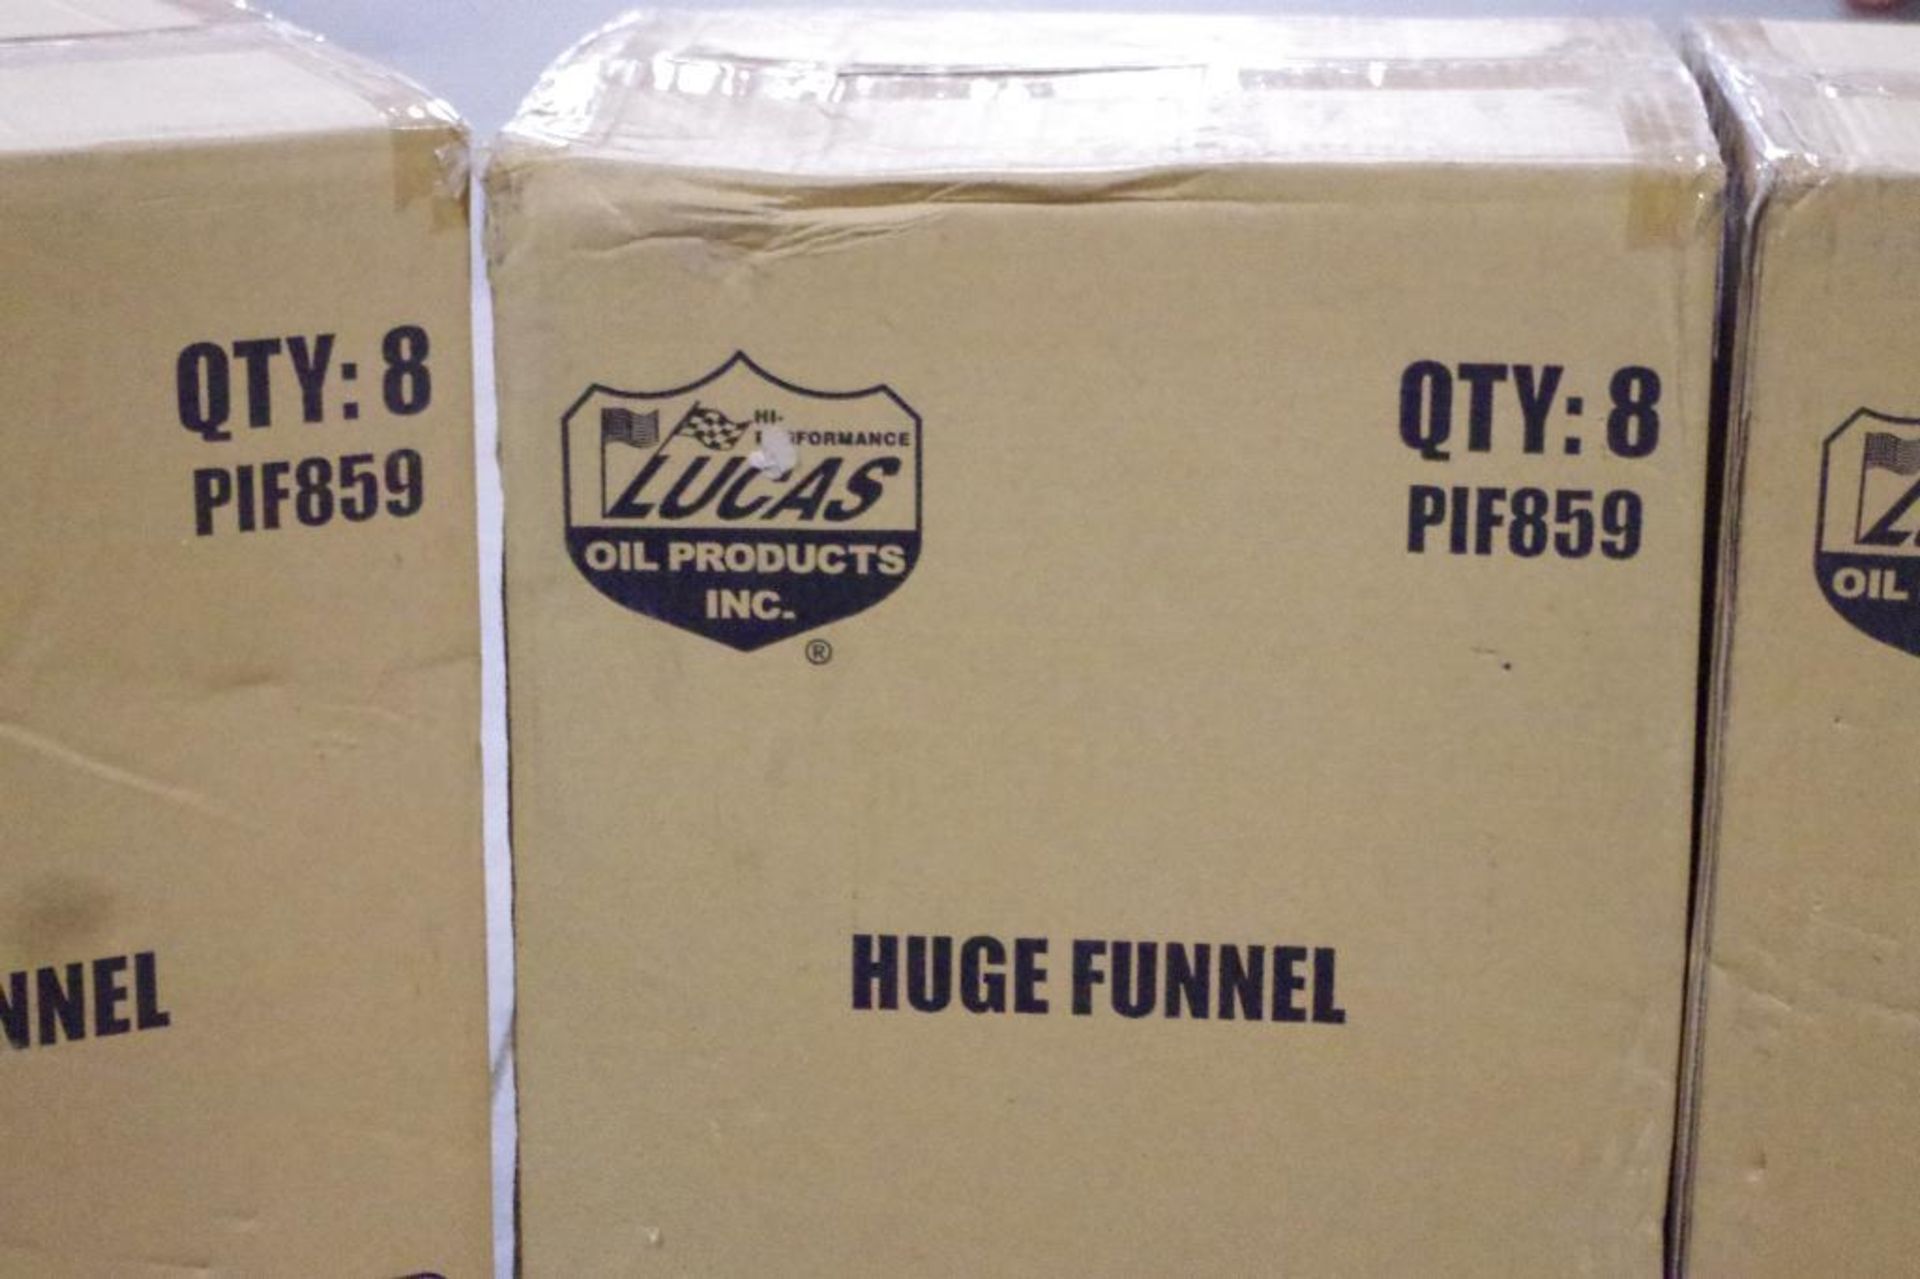 [32] NEW LUCAS Huge Funnels M/N PIF859 (4 Boxes of 8) - Image 3 of 4